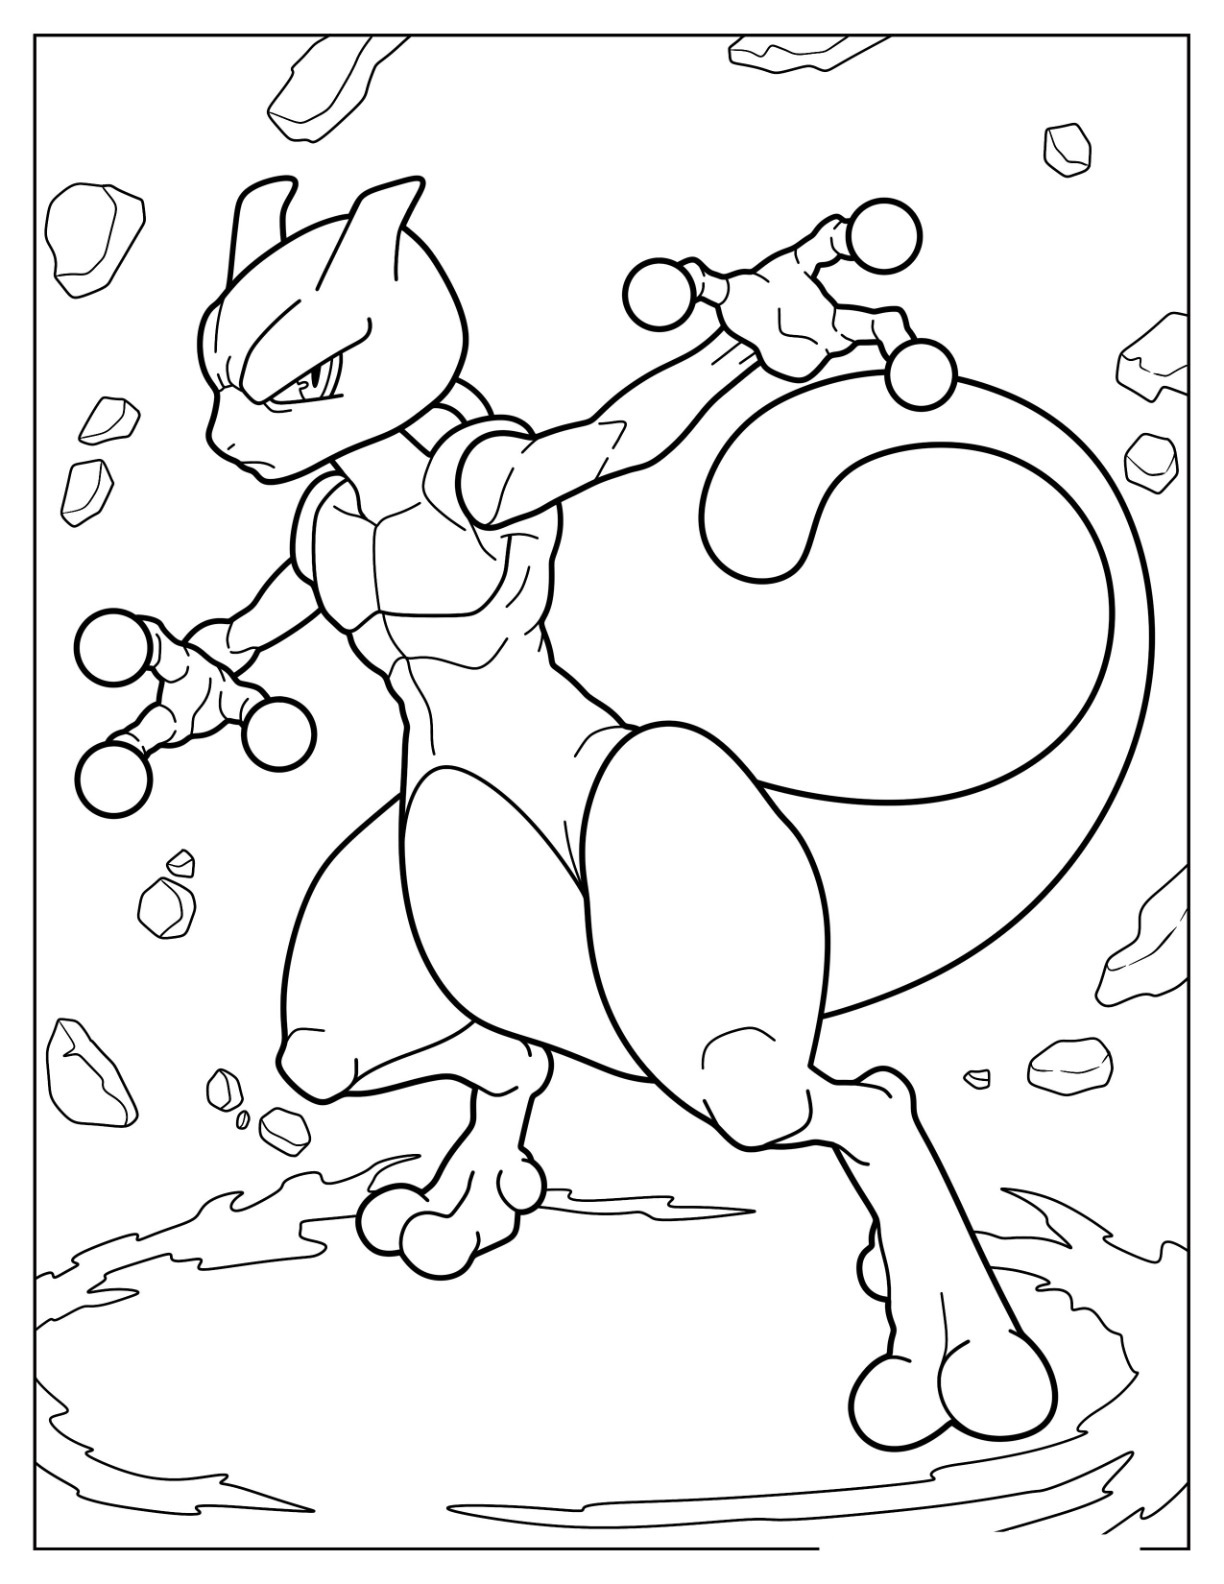 Mewtwo coloring pages by coloringpageswk on